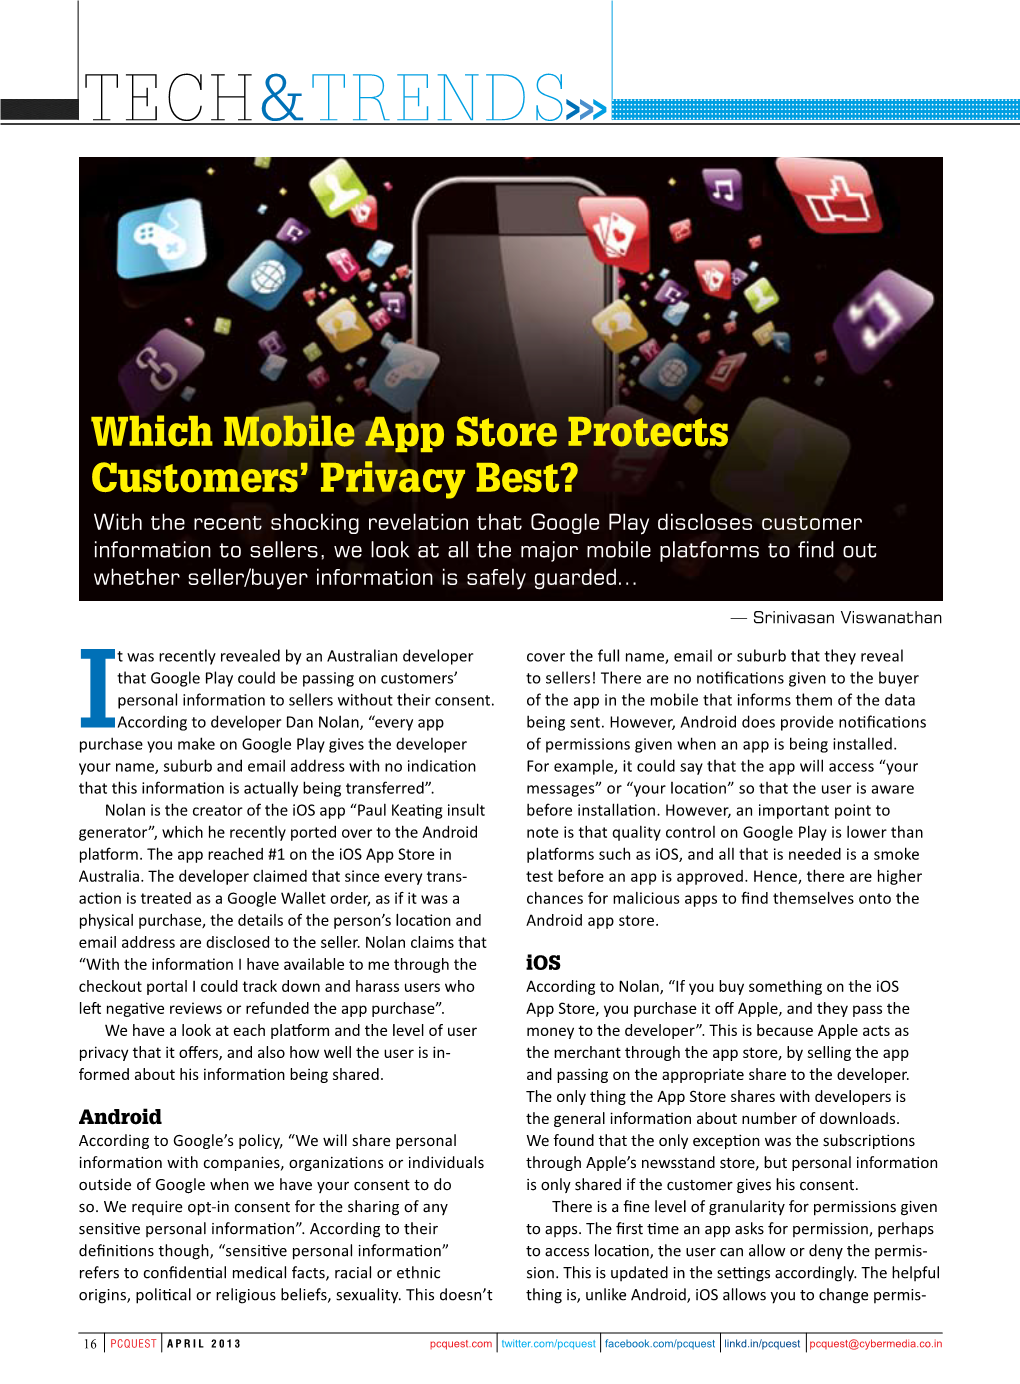 Which Mobile App Store Protects Customers' Privacy